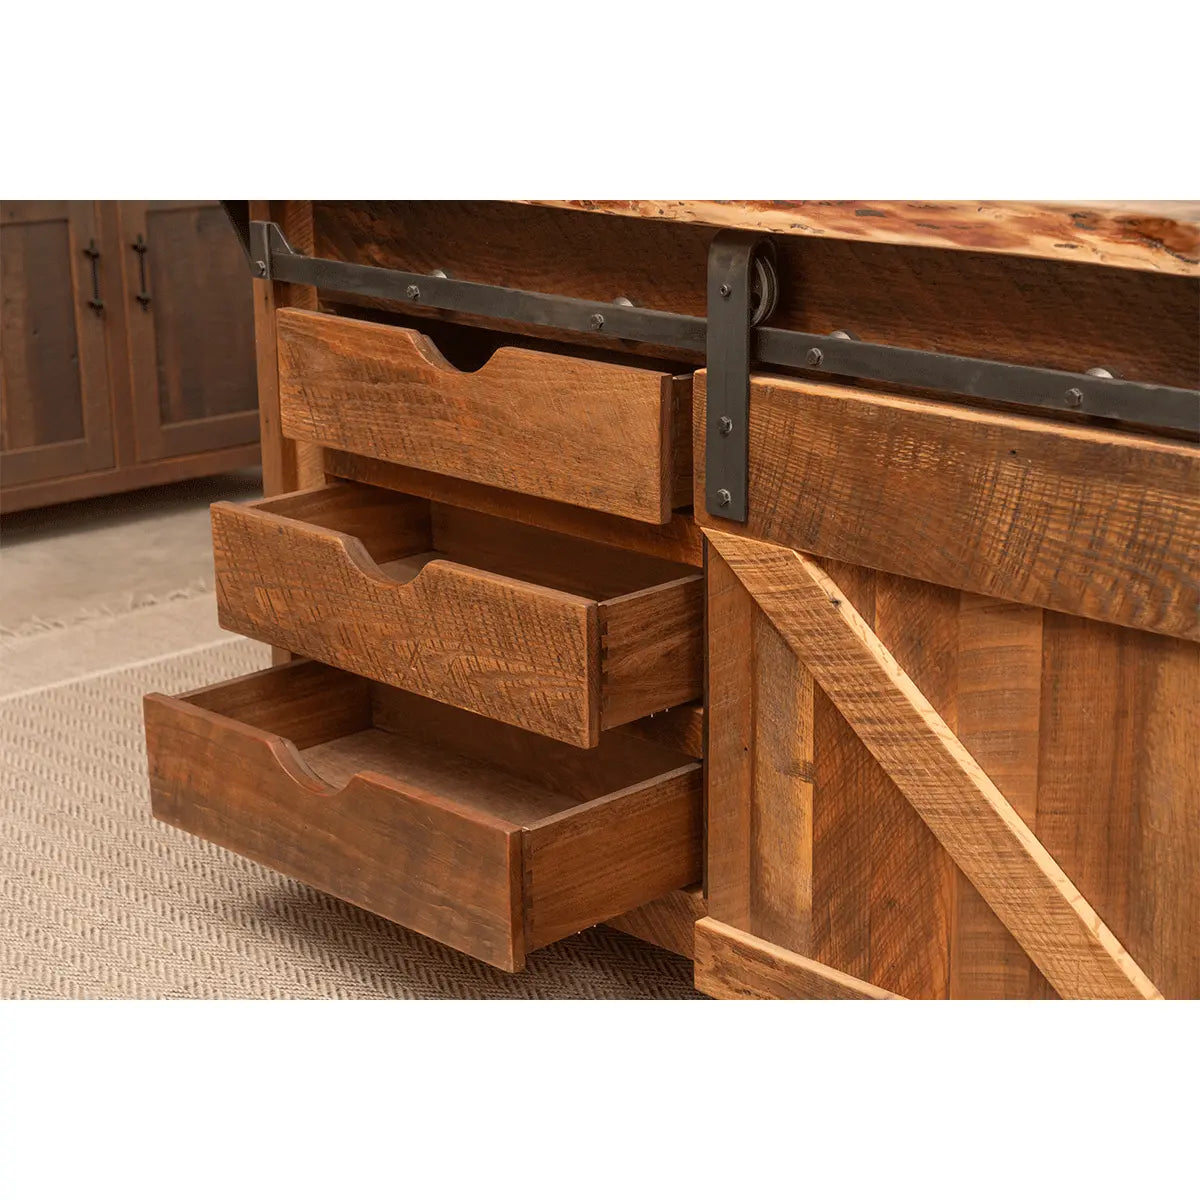 Drawers for Rustic Kitchen Island